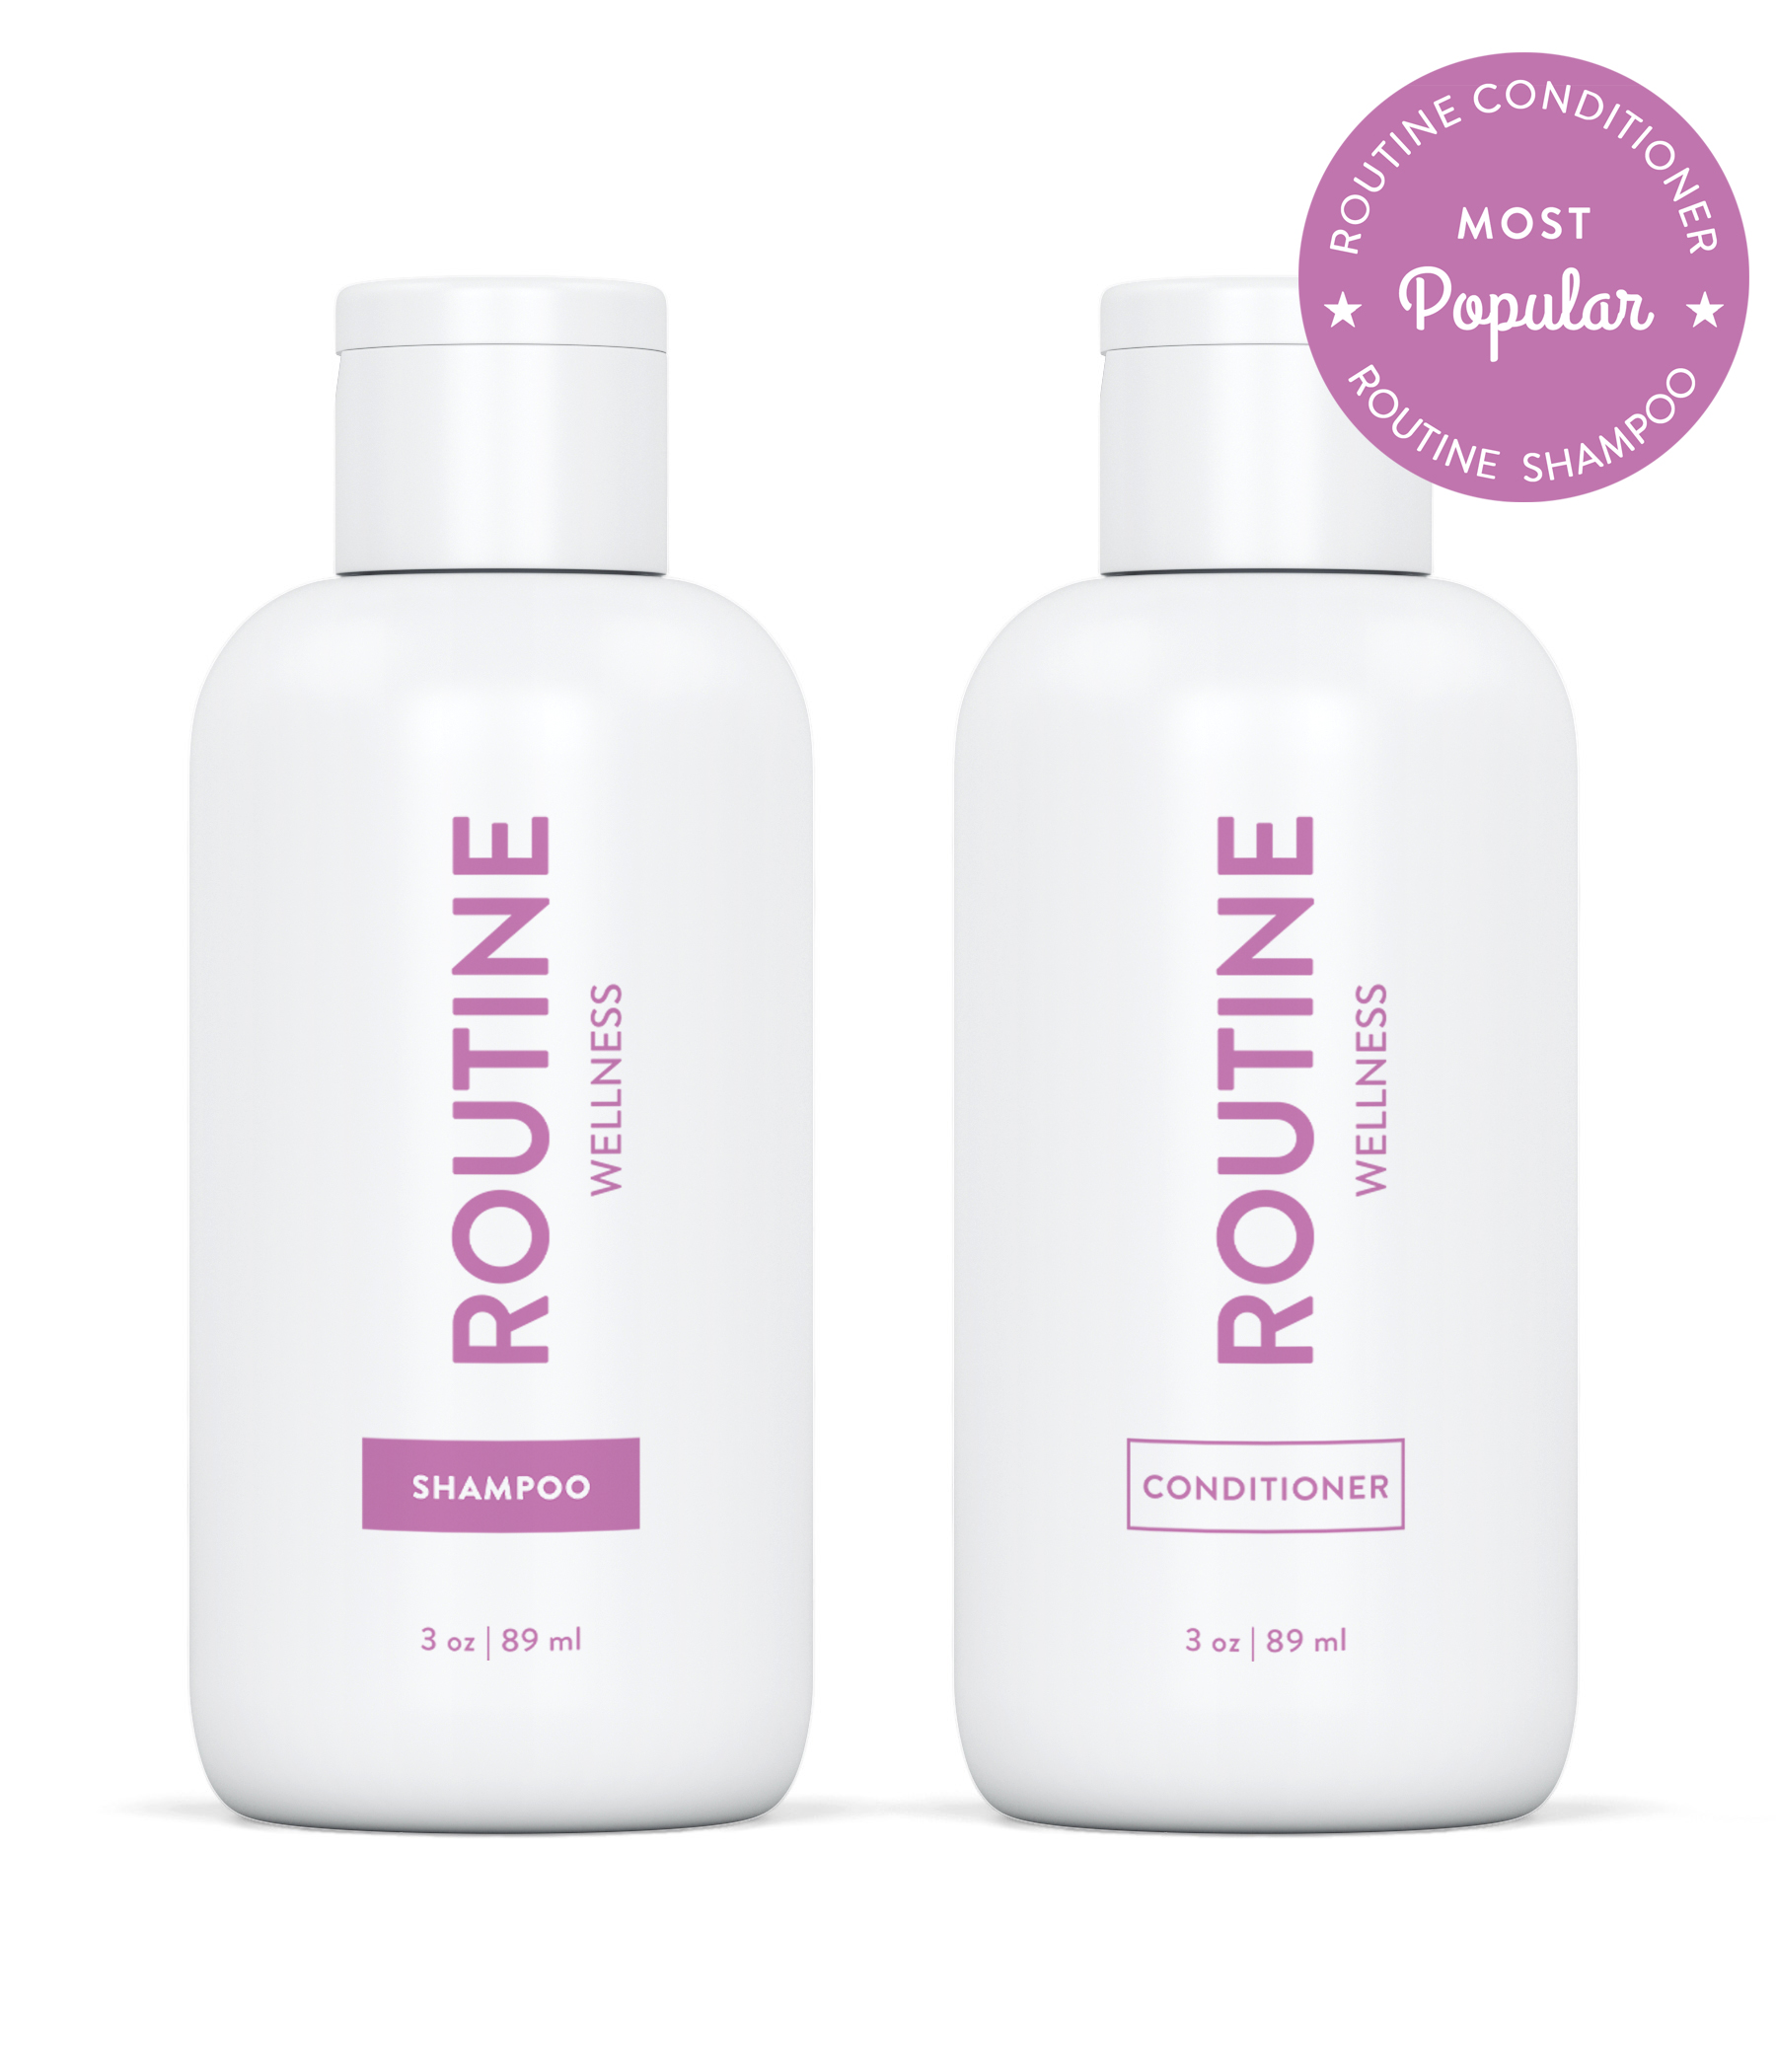 Routine Wellness Shampoo and Conditioner are scientifically formulated to end bad hair days by strengthening hair and reducing breakage